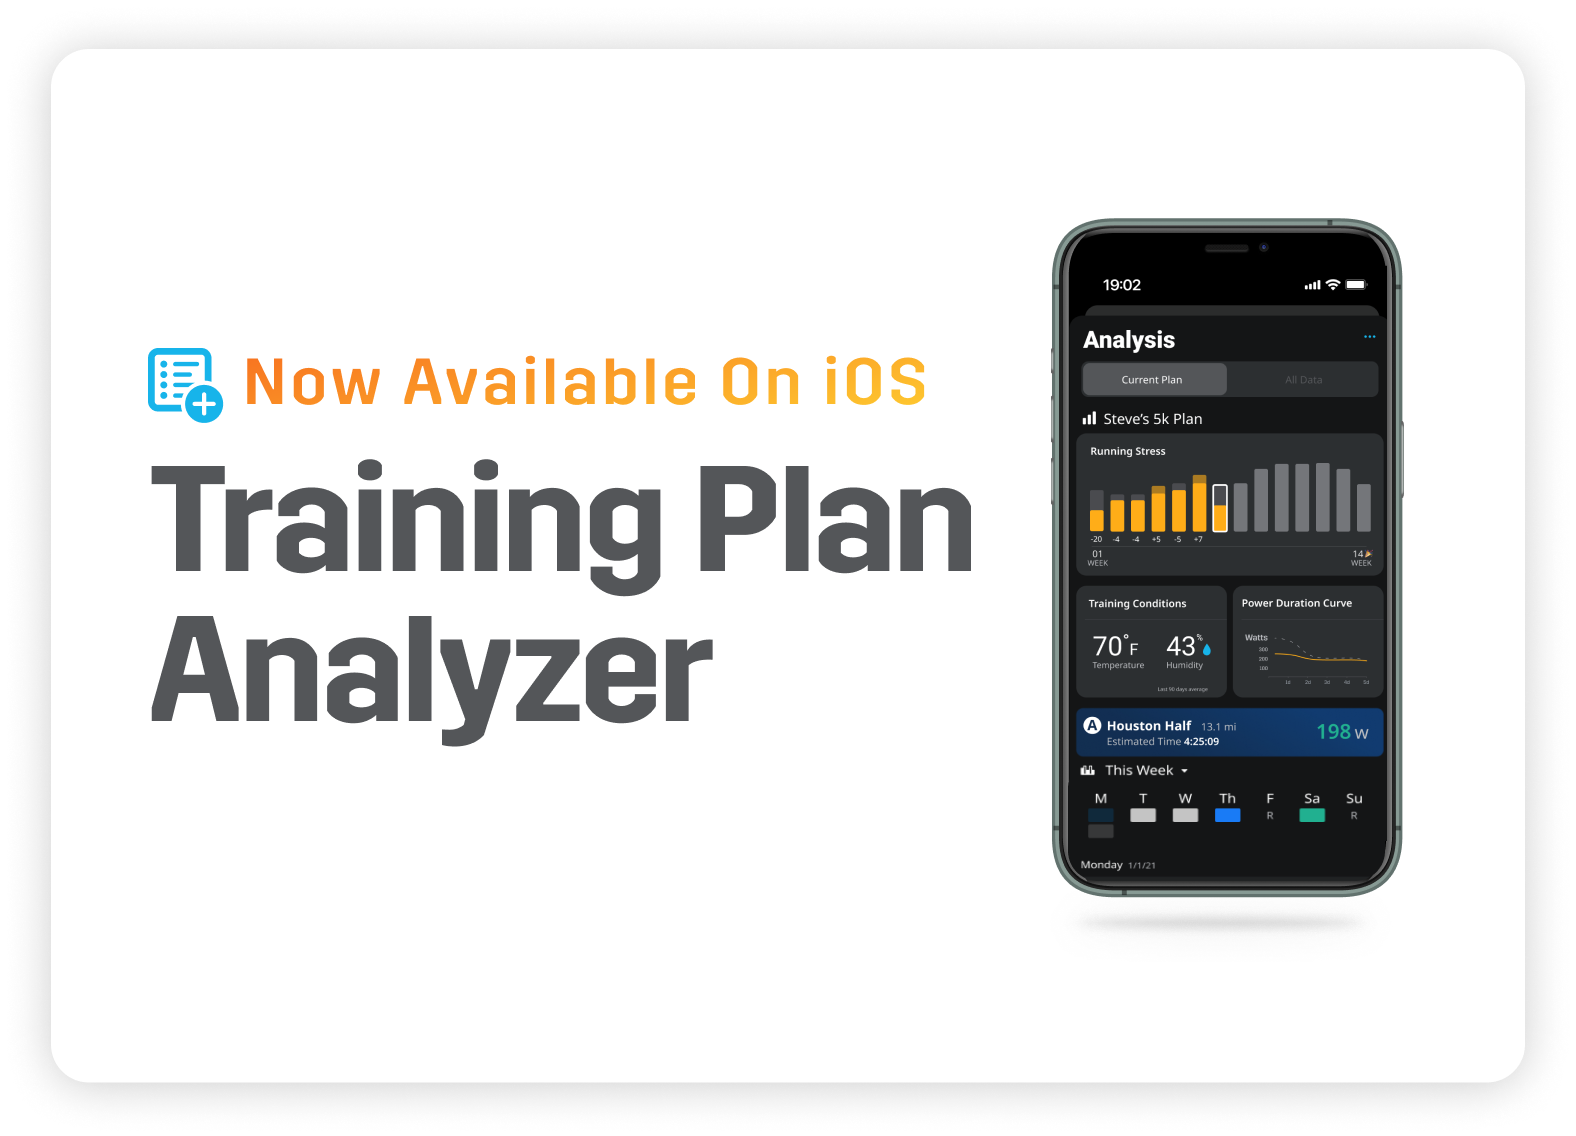 iOS Release: Track your training plan progress with the Training Plan Analyzer